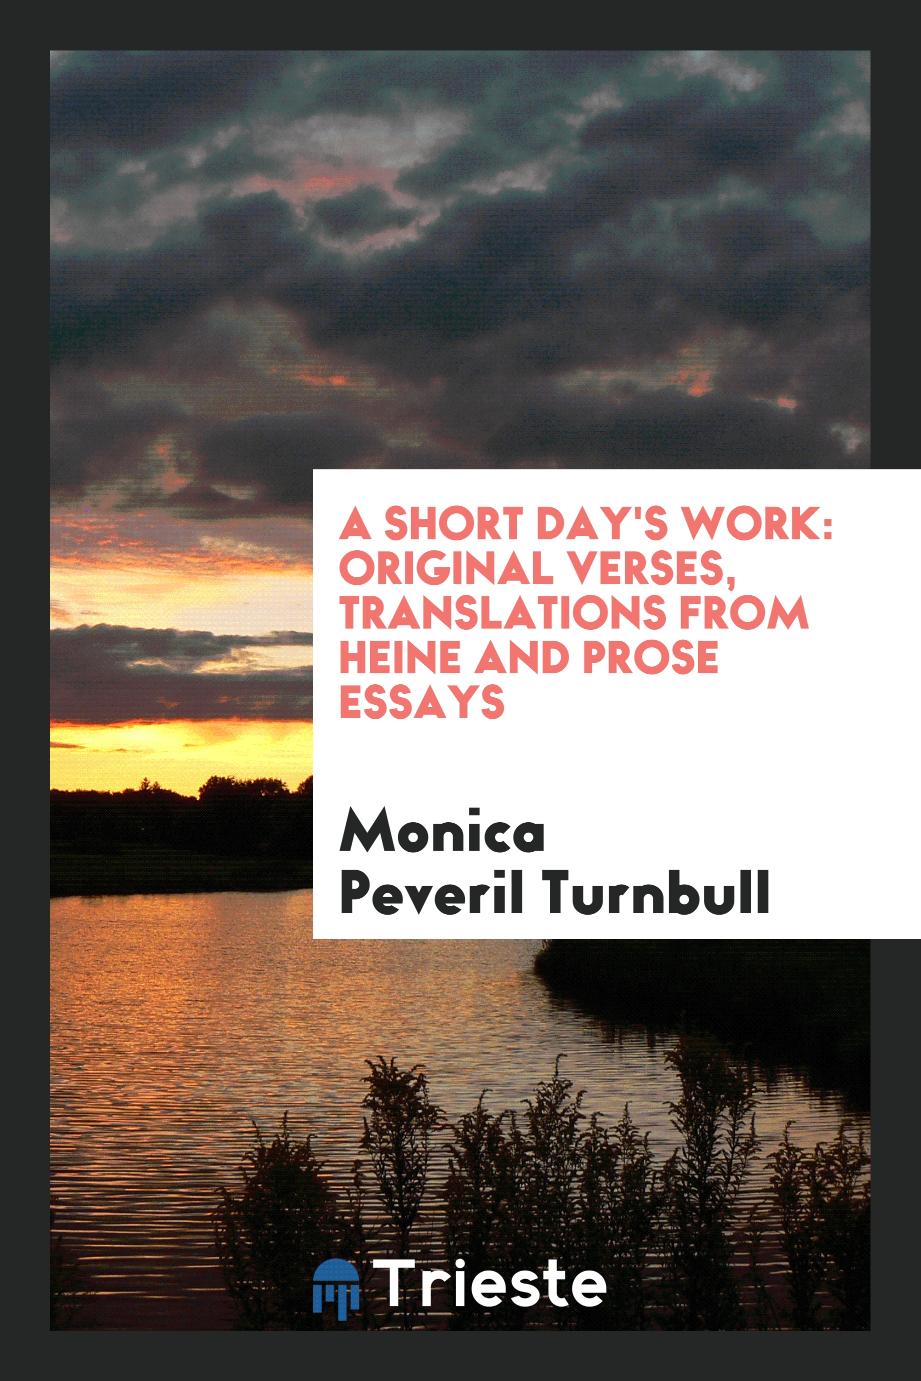 A Short Day's Work: Original Verses, Translations from Heine and Prose Essays